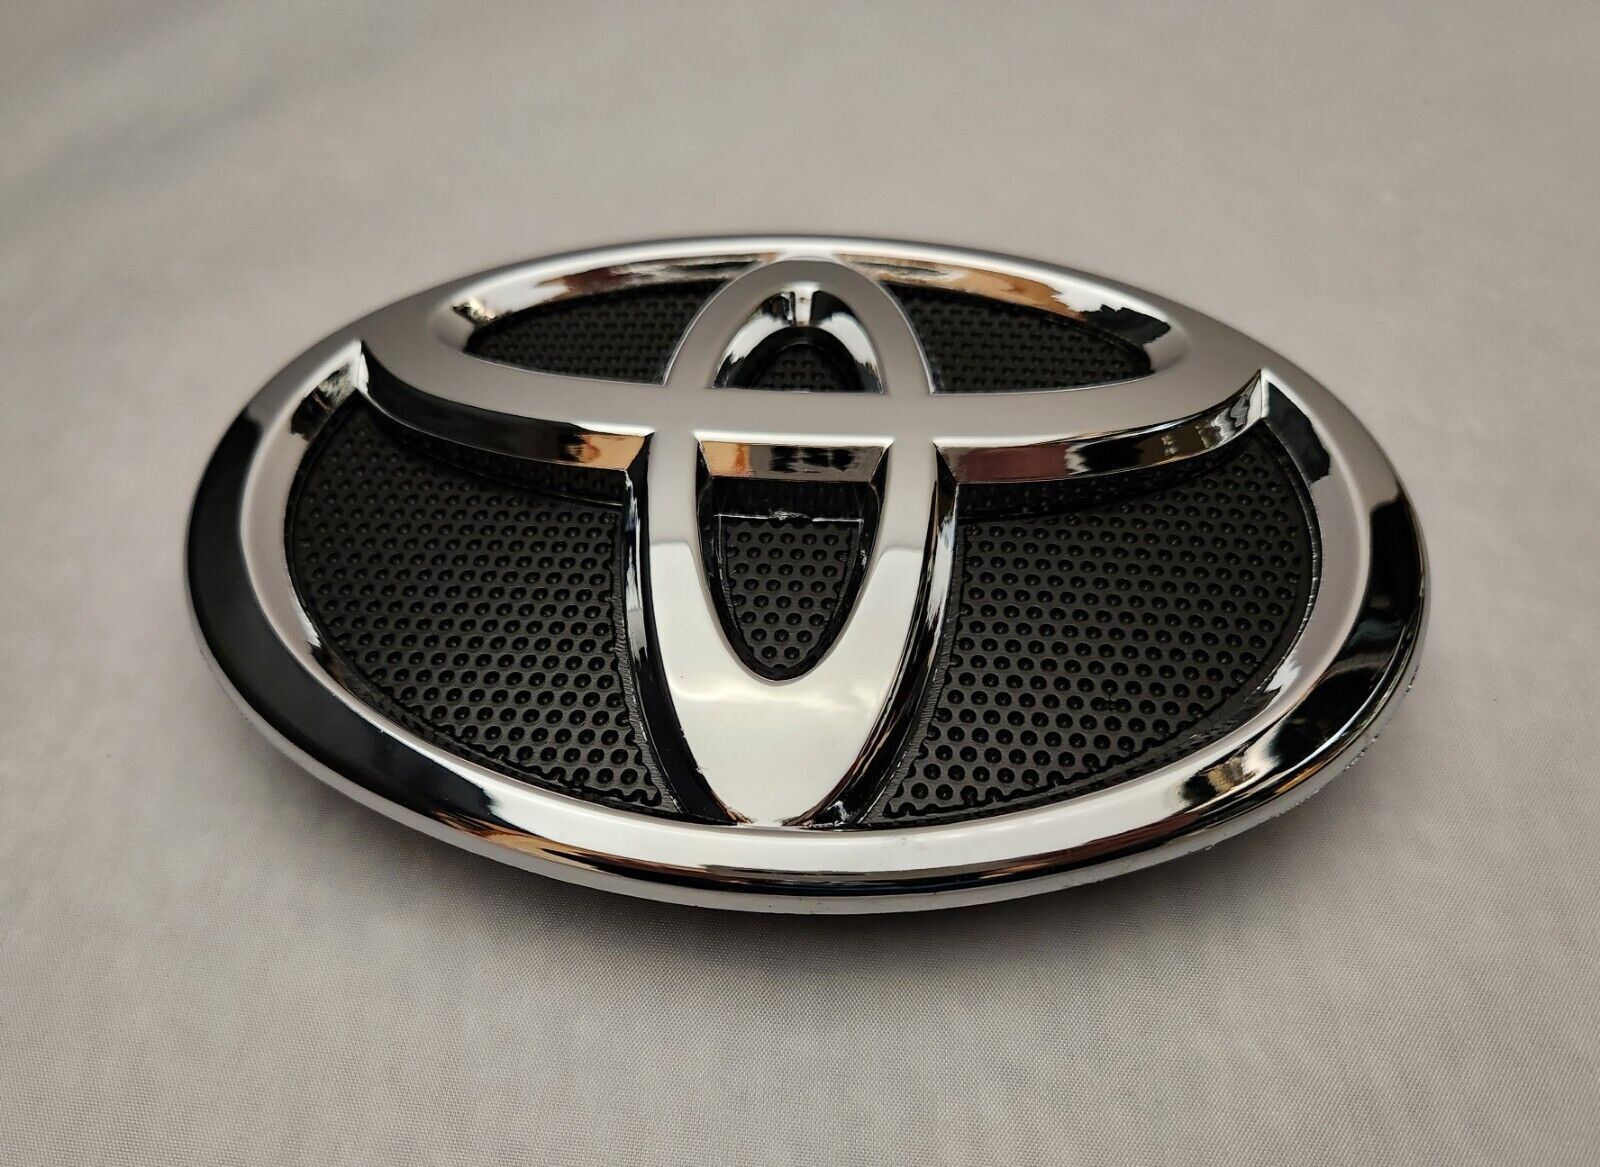 TOYOTA CAMRY 2010 2011 FRONT GRILL EMBLEM US SHIPPING